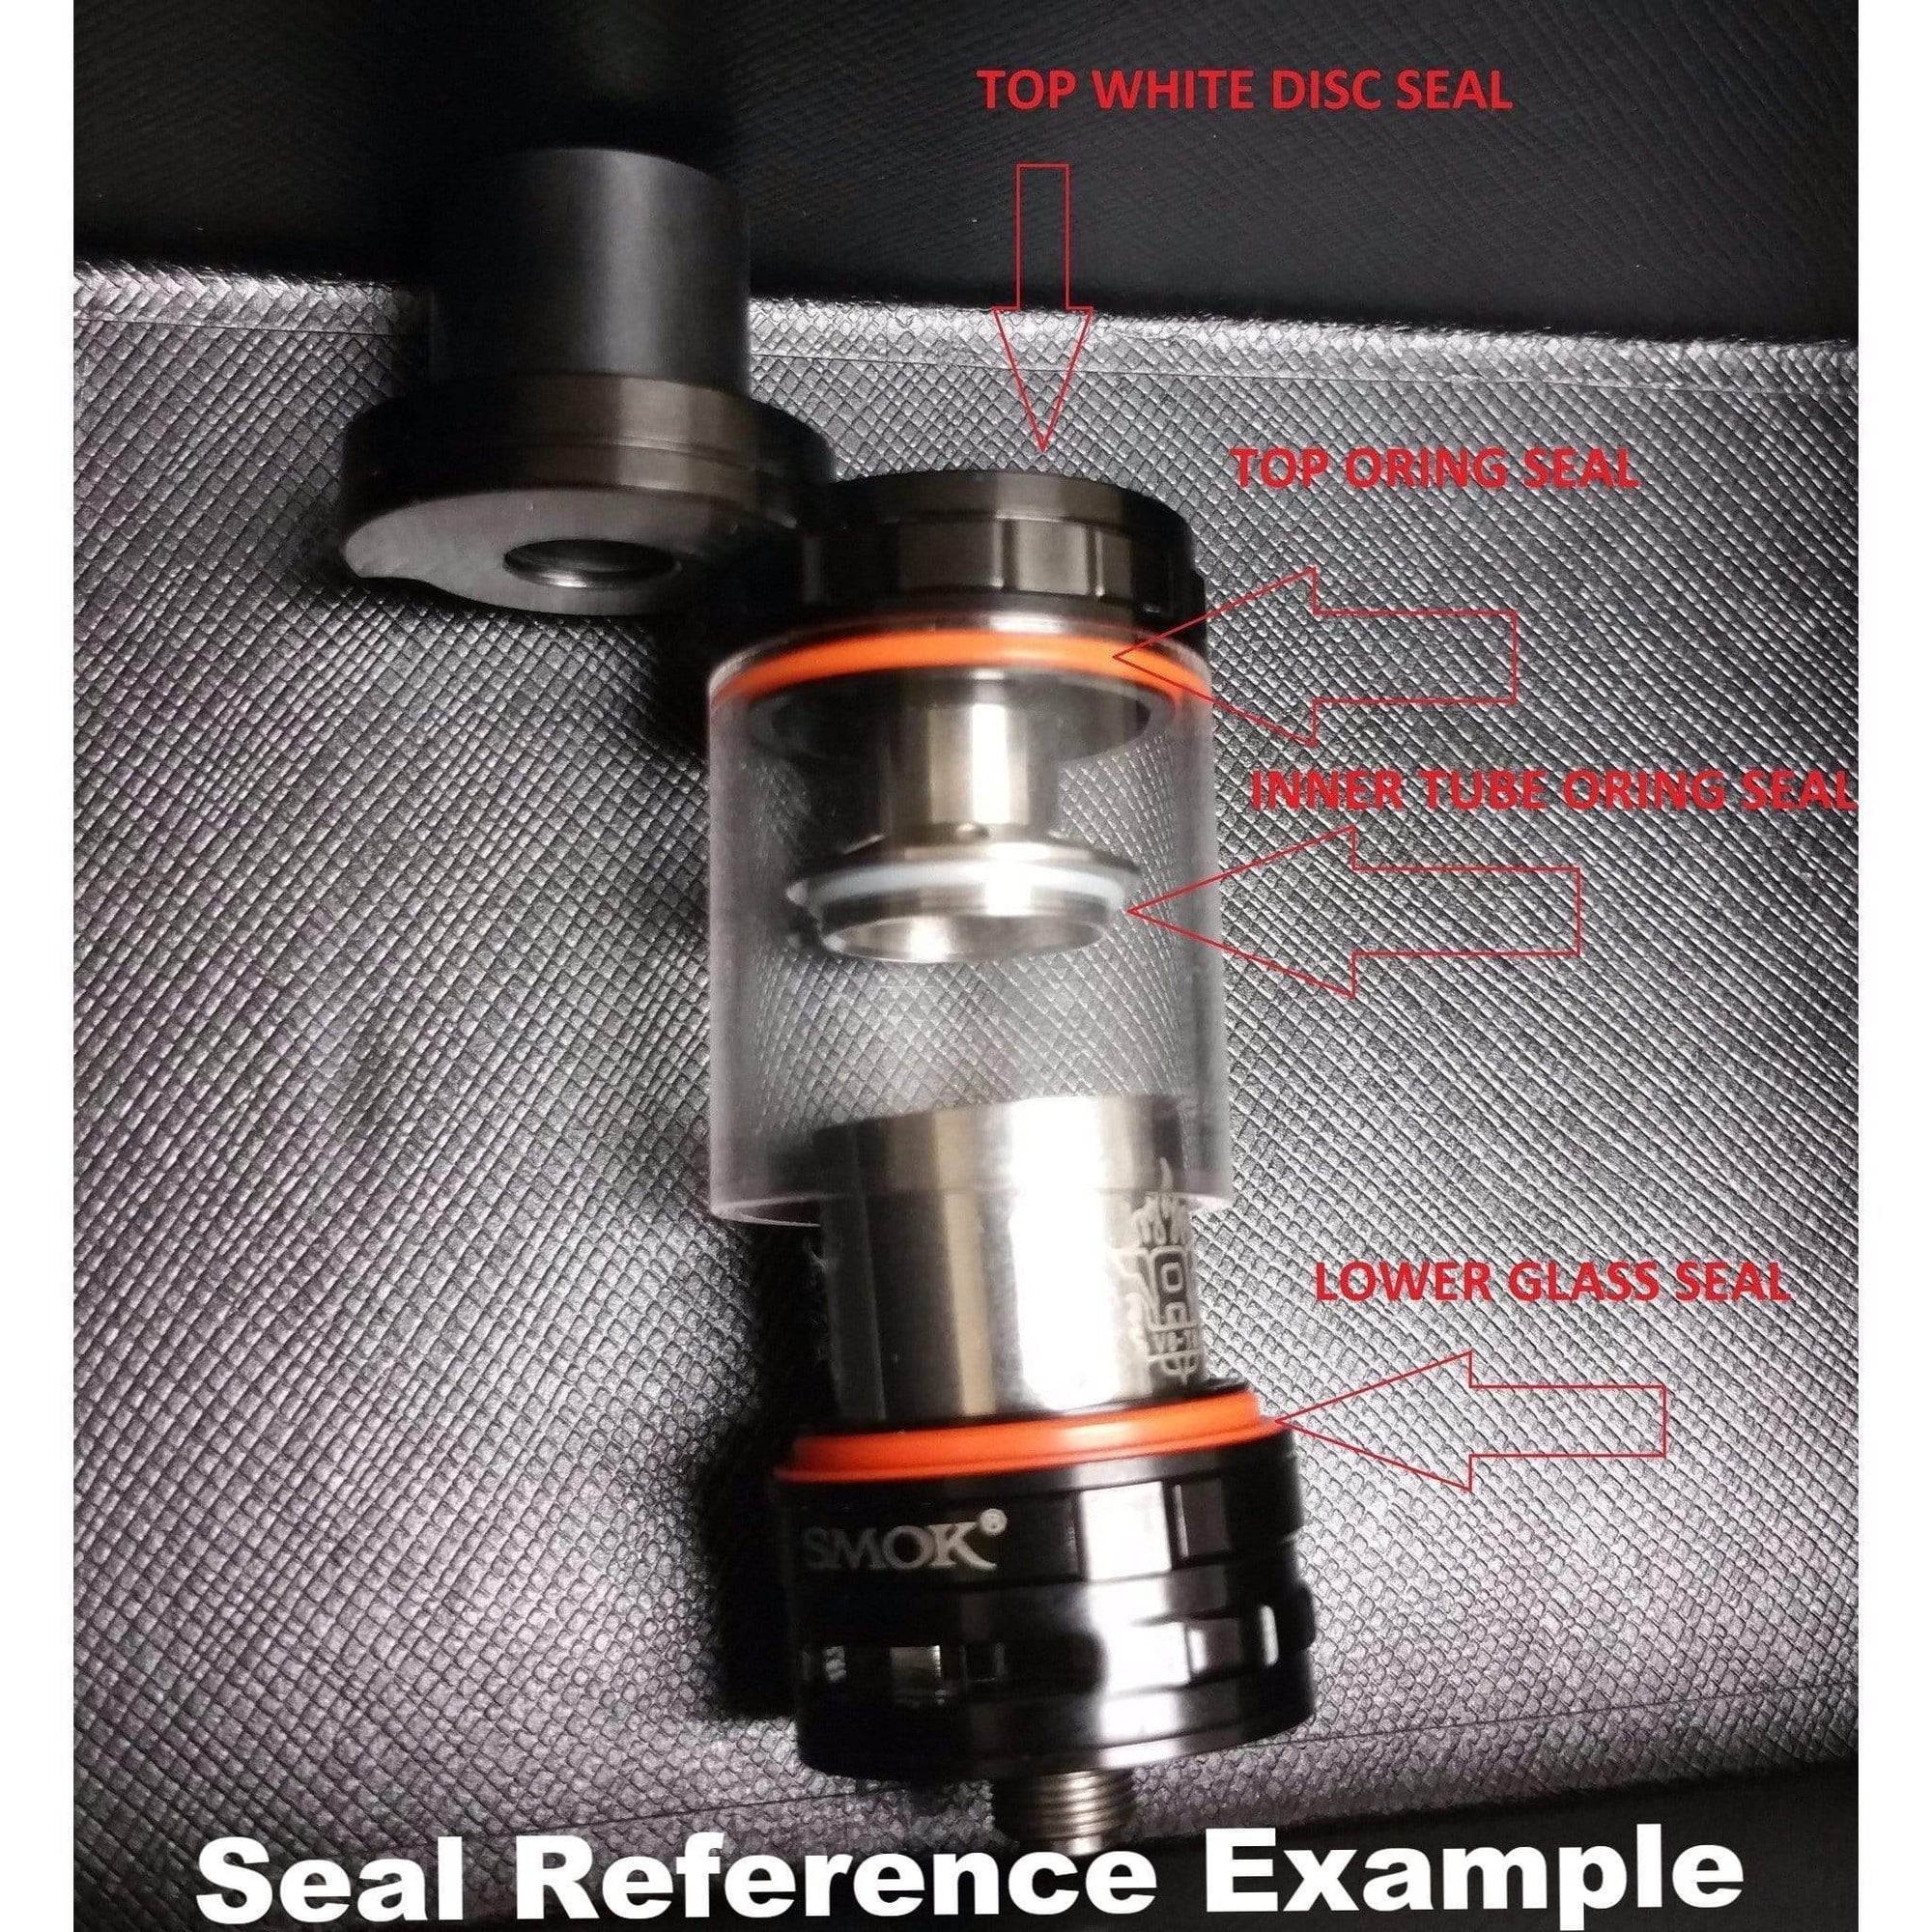 SMOK TFV8 X-Baby Replacement Seals TOP White Disc Seal Seals/Oring's